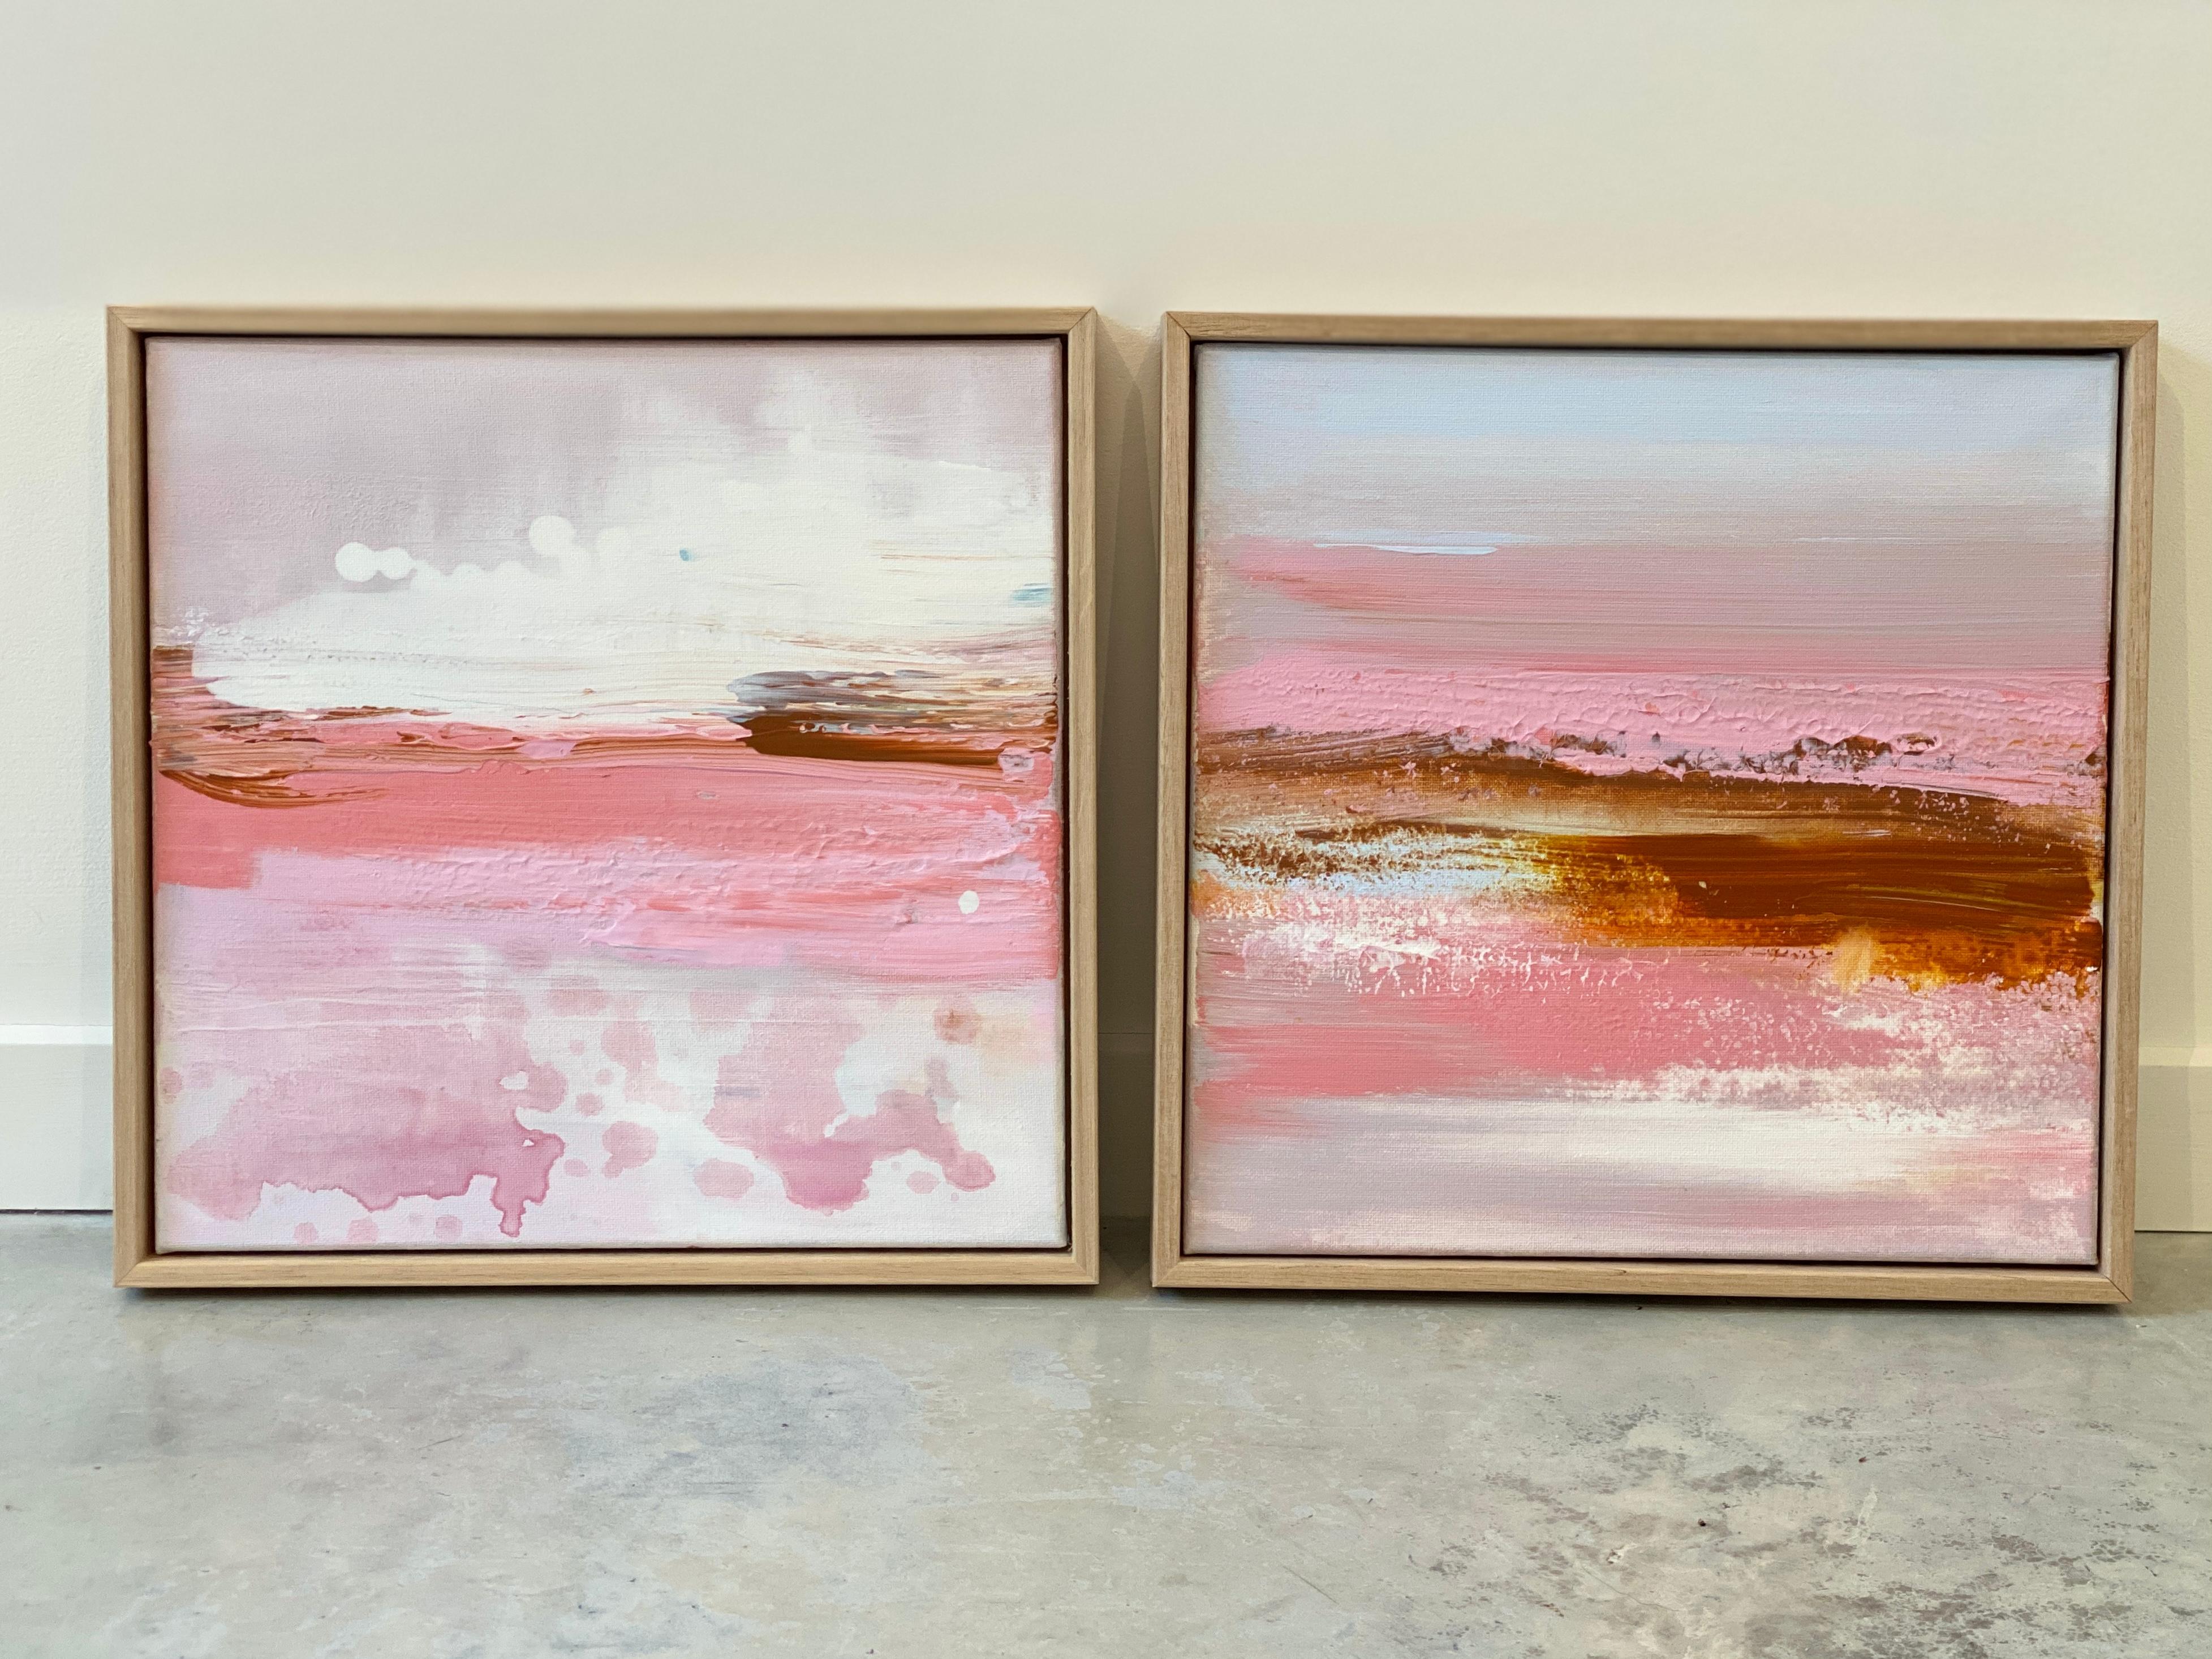 'It's Summer' a small square works collection of quality custom framed, minimalist abstract expressionist paintings on canvas. Lighten up the room with bright, summer colours of pastels, deep shades of ocean blues and aqua's. Enjoy the energy and